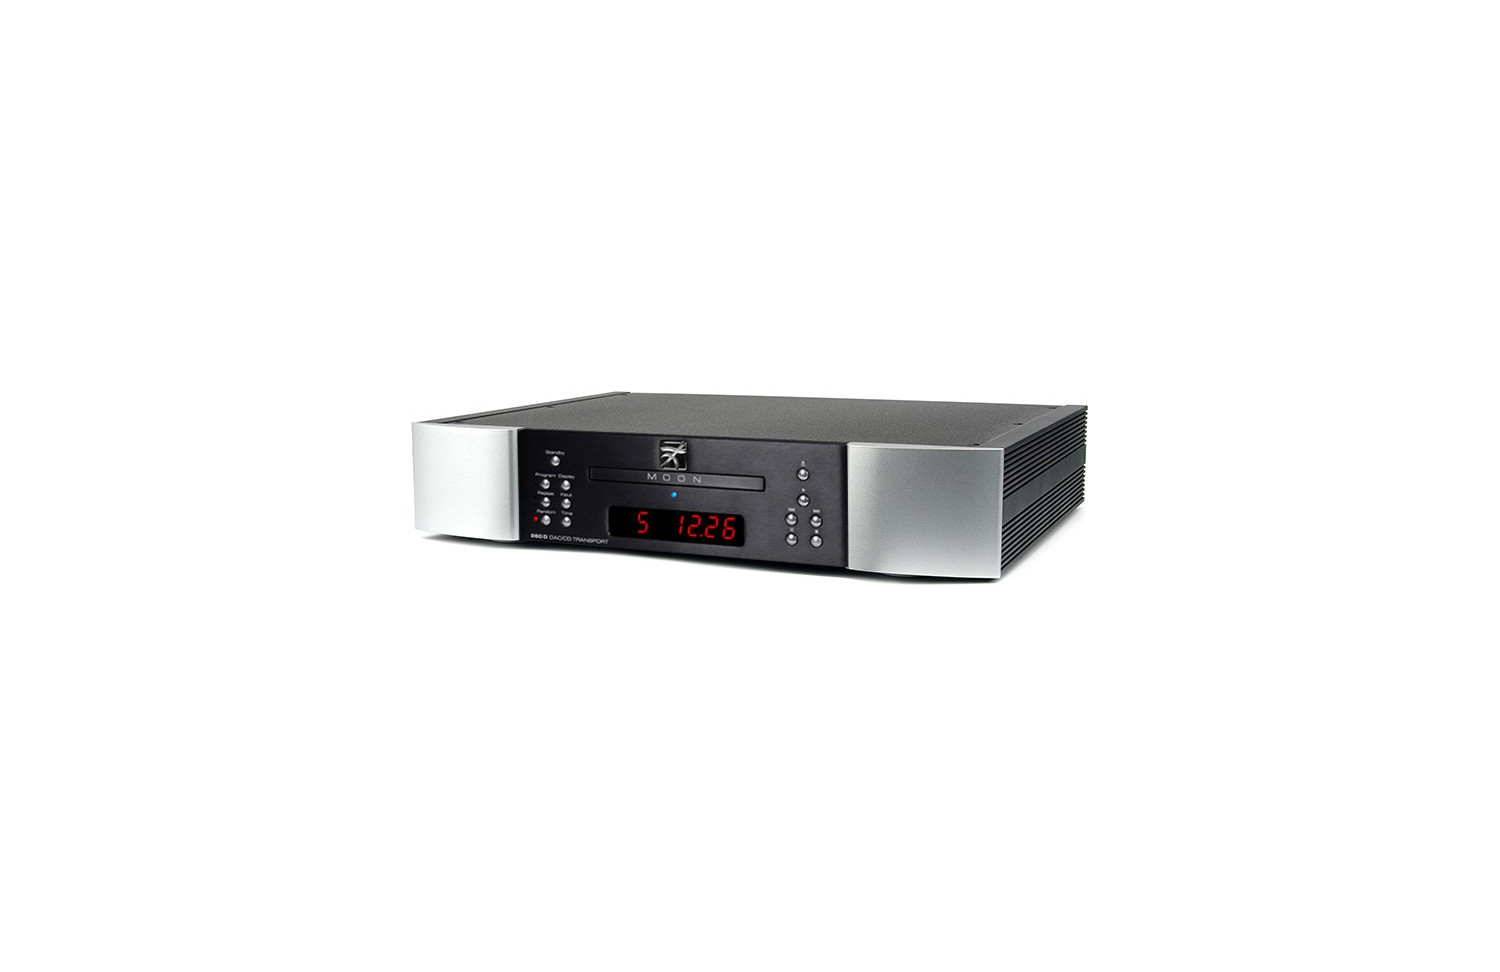 Reproductor - Lector Cd Moon 260d Neo 220v